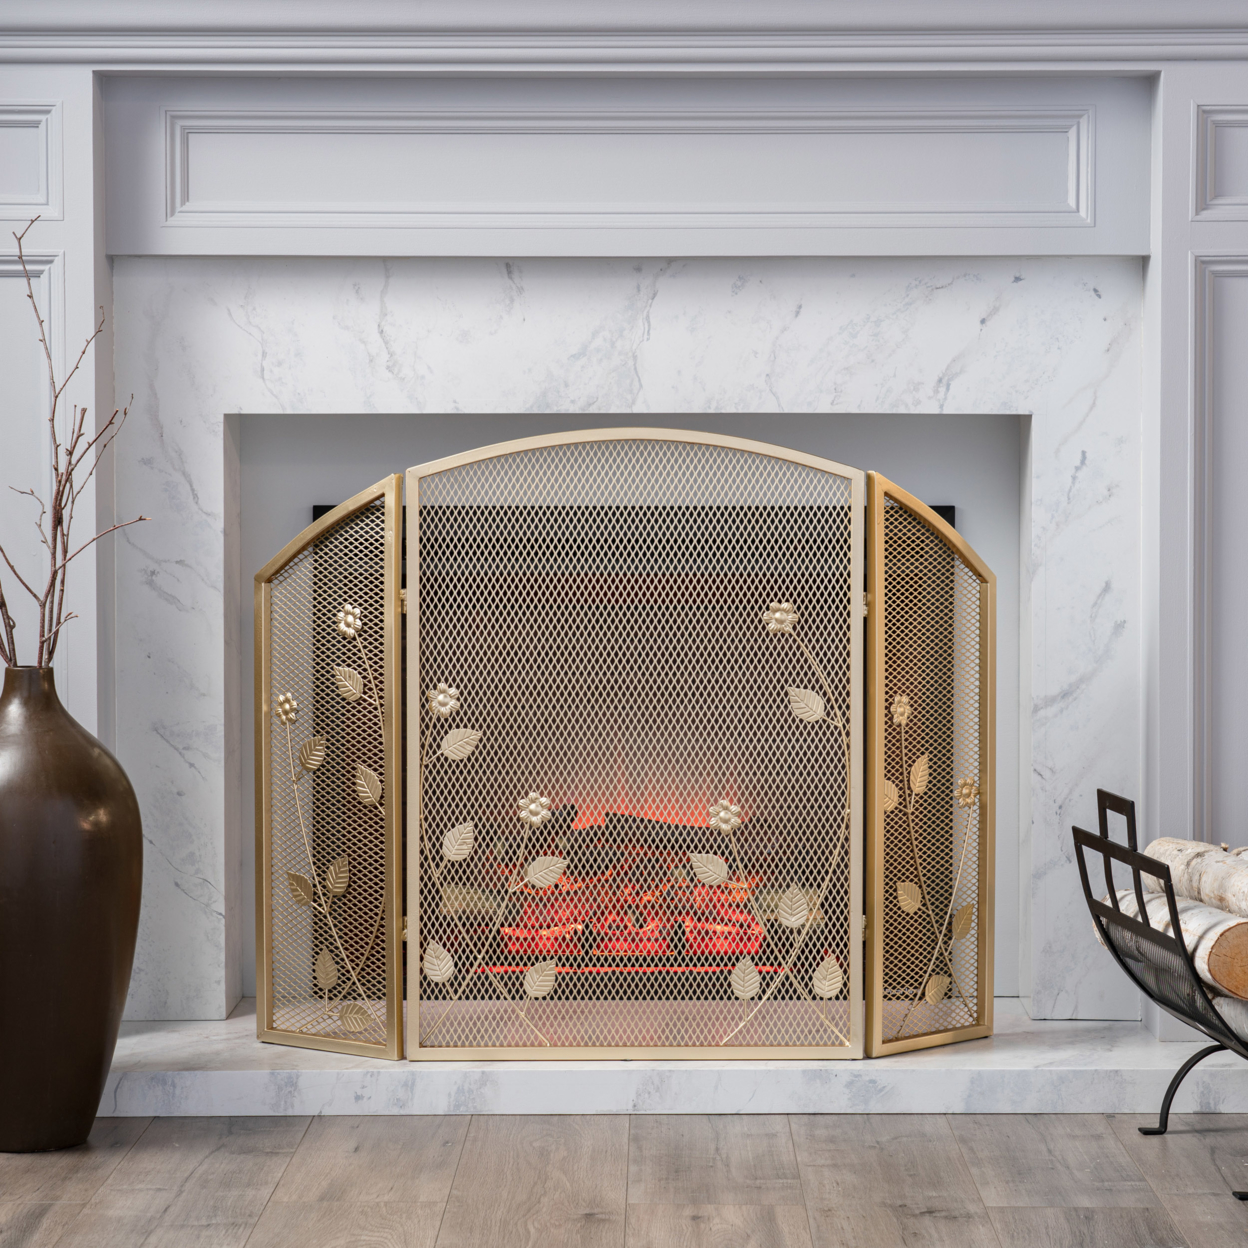 Jenna Modern Iron Firescreen With Leaf Accents - Black Gold Finish